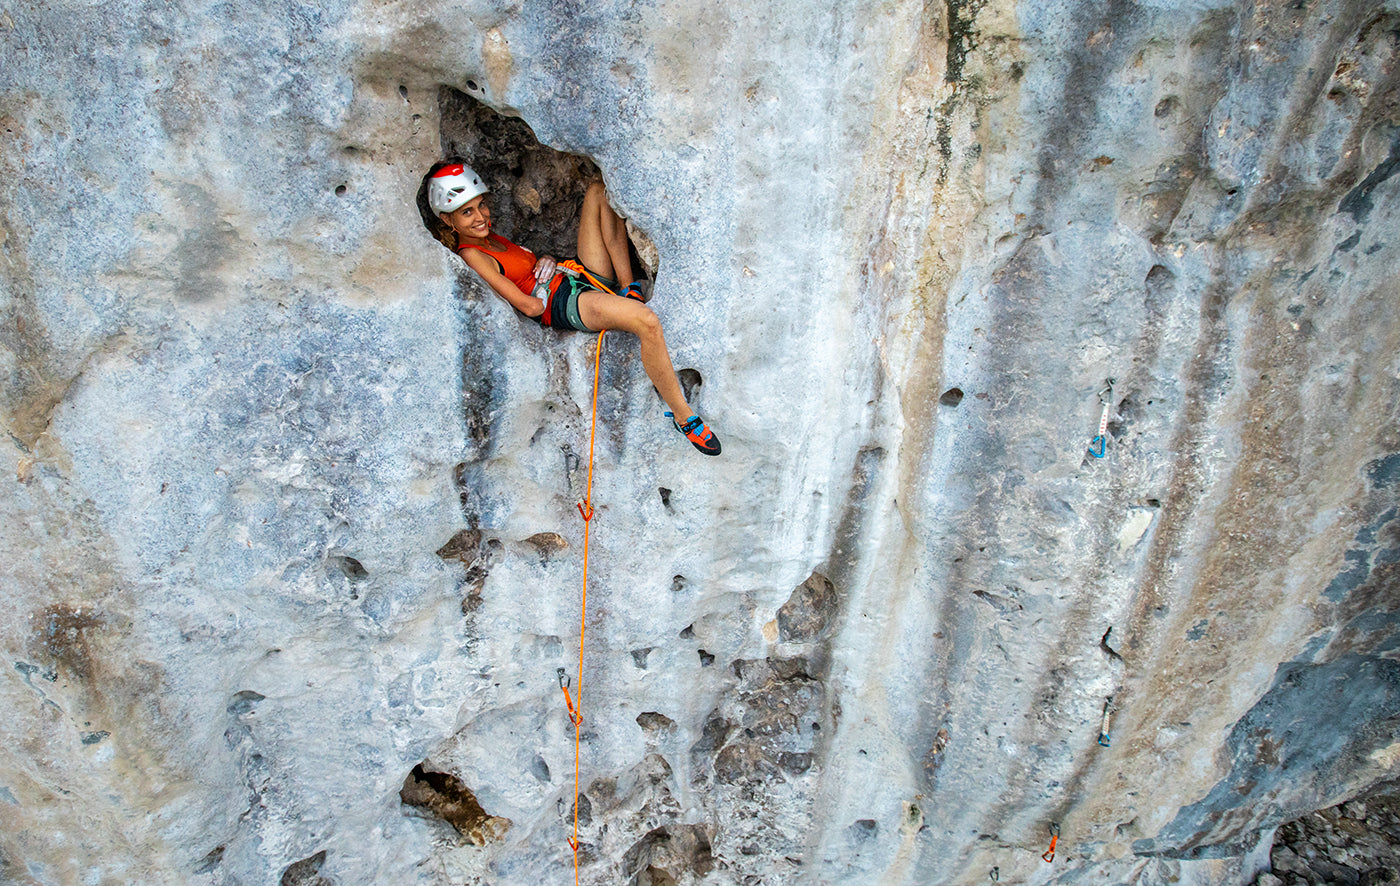 Cliffhanger, published by gestalten. Photo: Guillaume Broust, Bourg Saint Maurice 